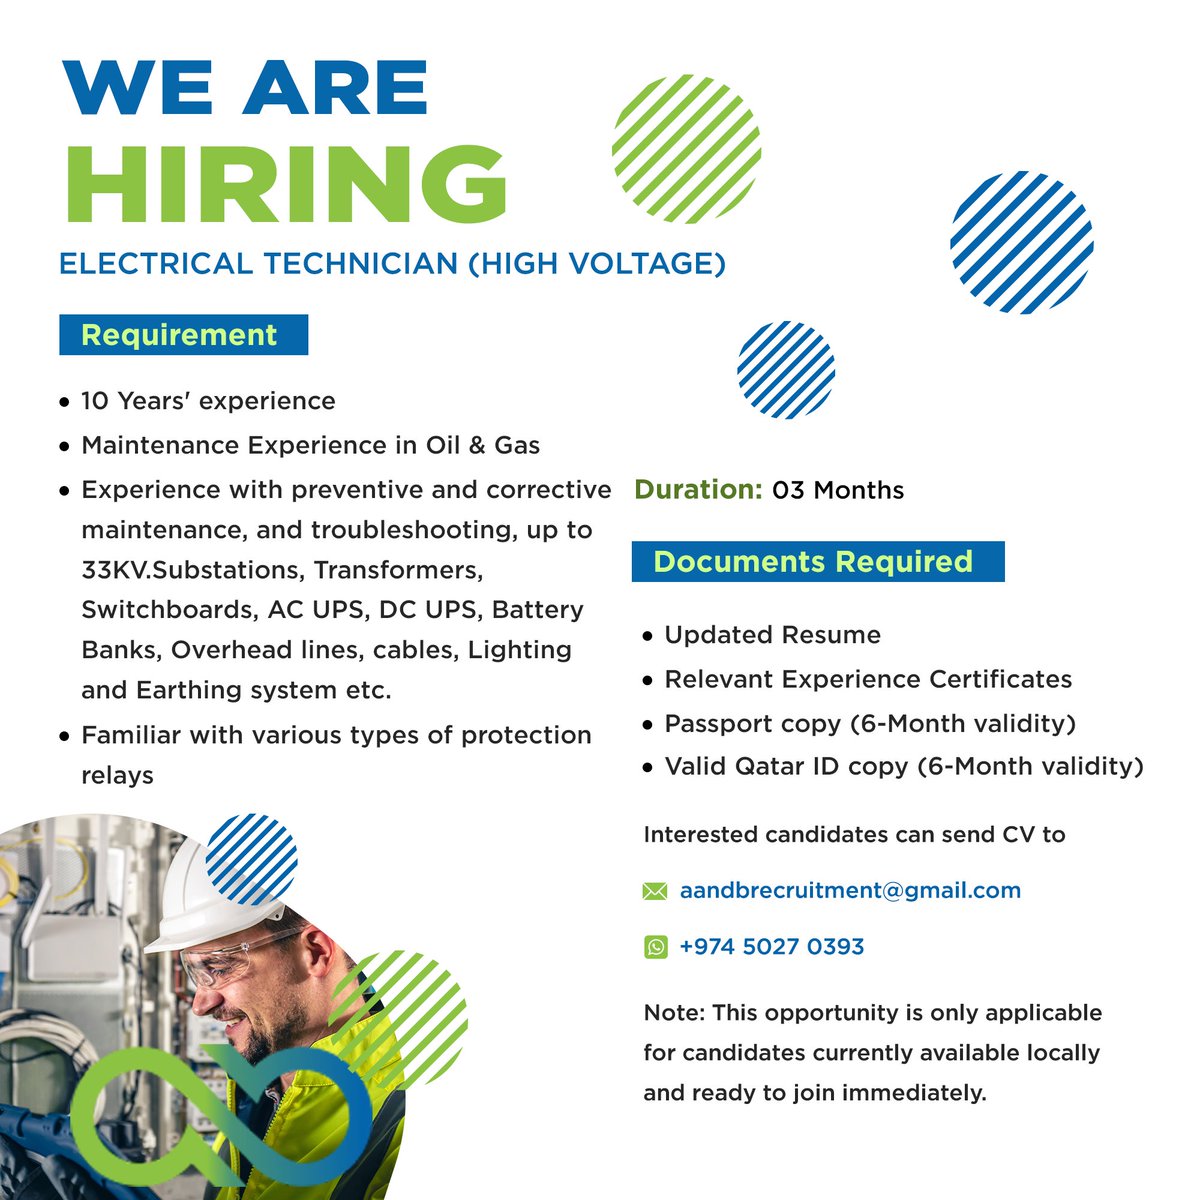 Open position for Electrical Technician(High Voltage) with Maintenance Experience in Oil and Gas for Qatar location. To apply, send your resume to aandbrecruitment@gmail.com or contact +974 - 50270393 . . . #AandBprojects #Qatar #OilandGasConvention2024 #TECHNICIAN